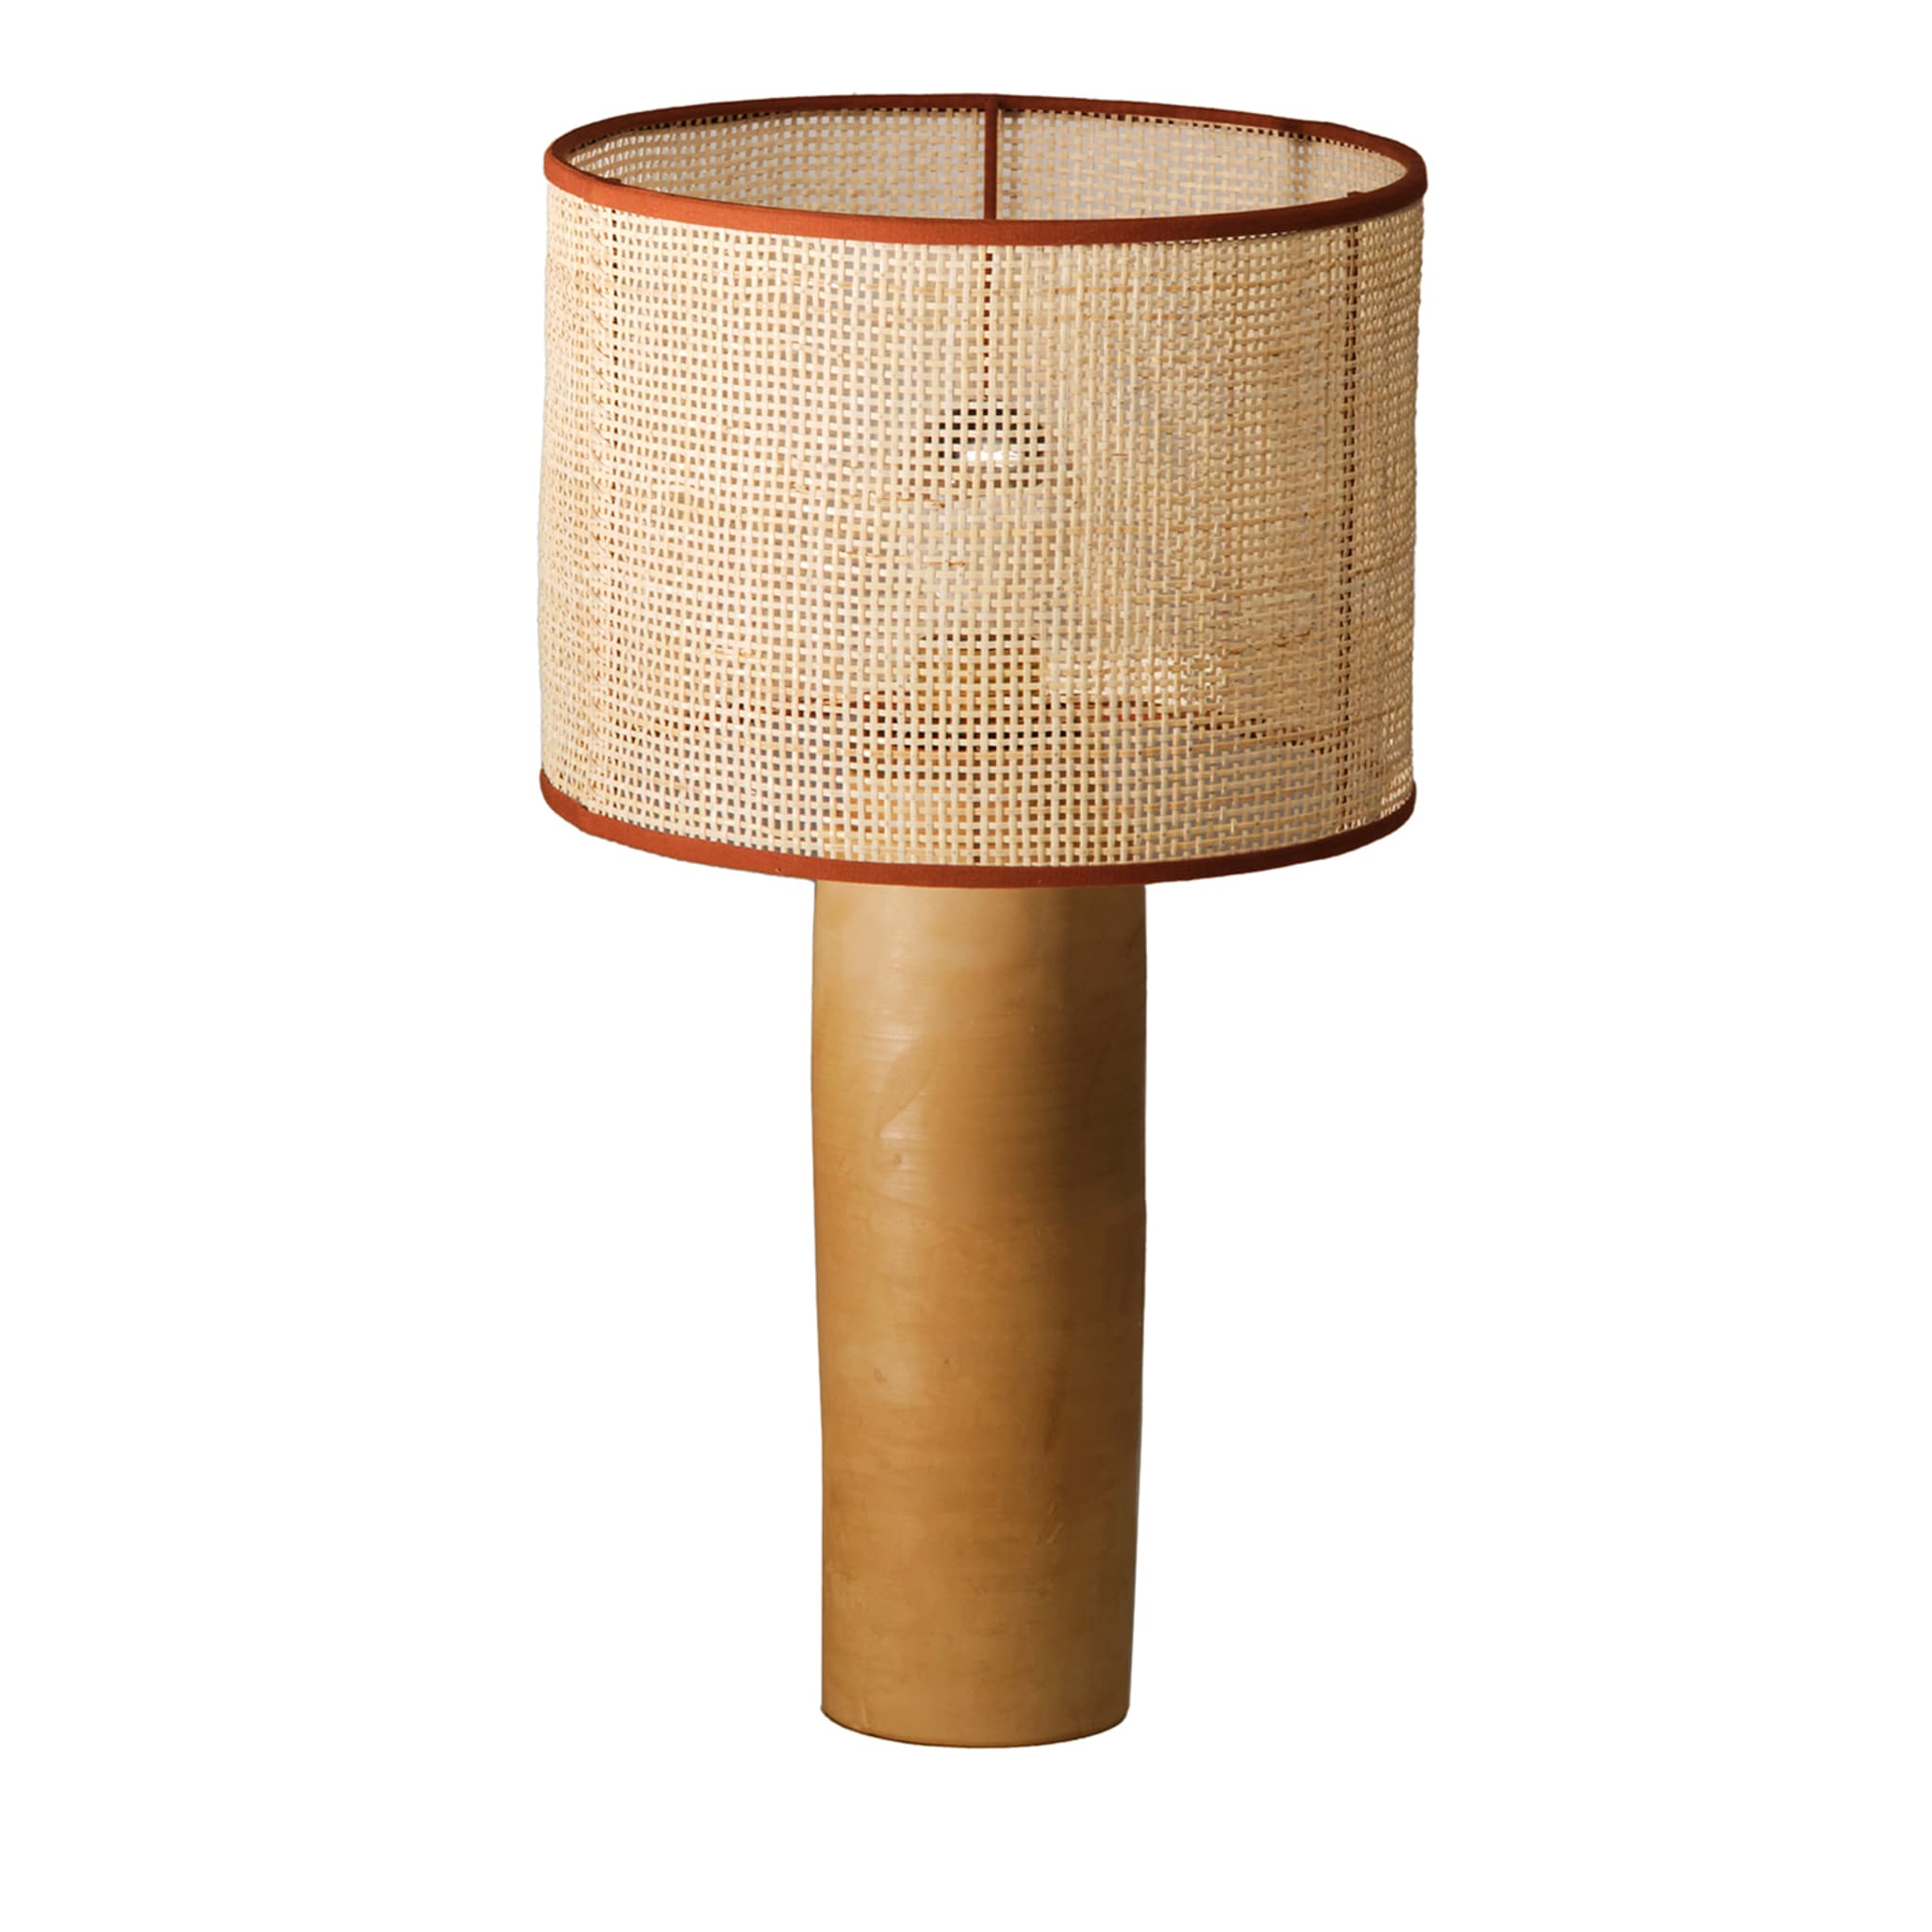 Sonora Rattan Small Table Lamp #1 - Main view